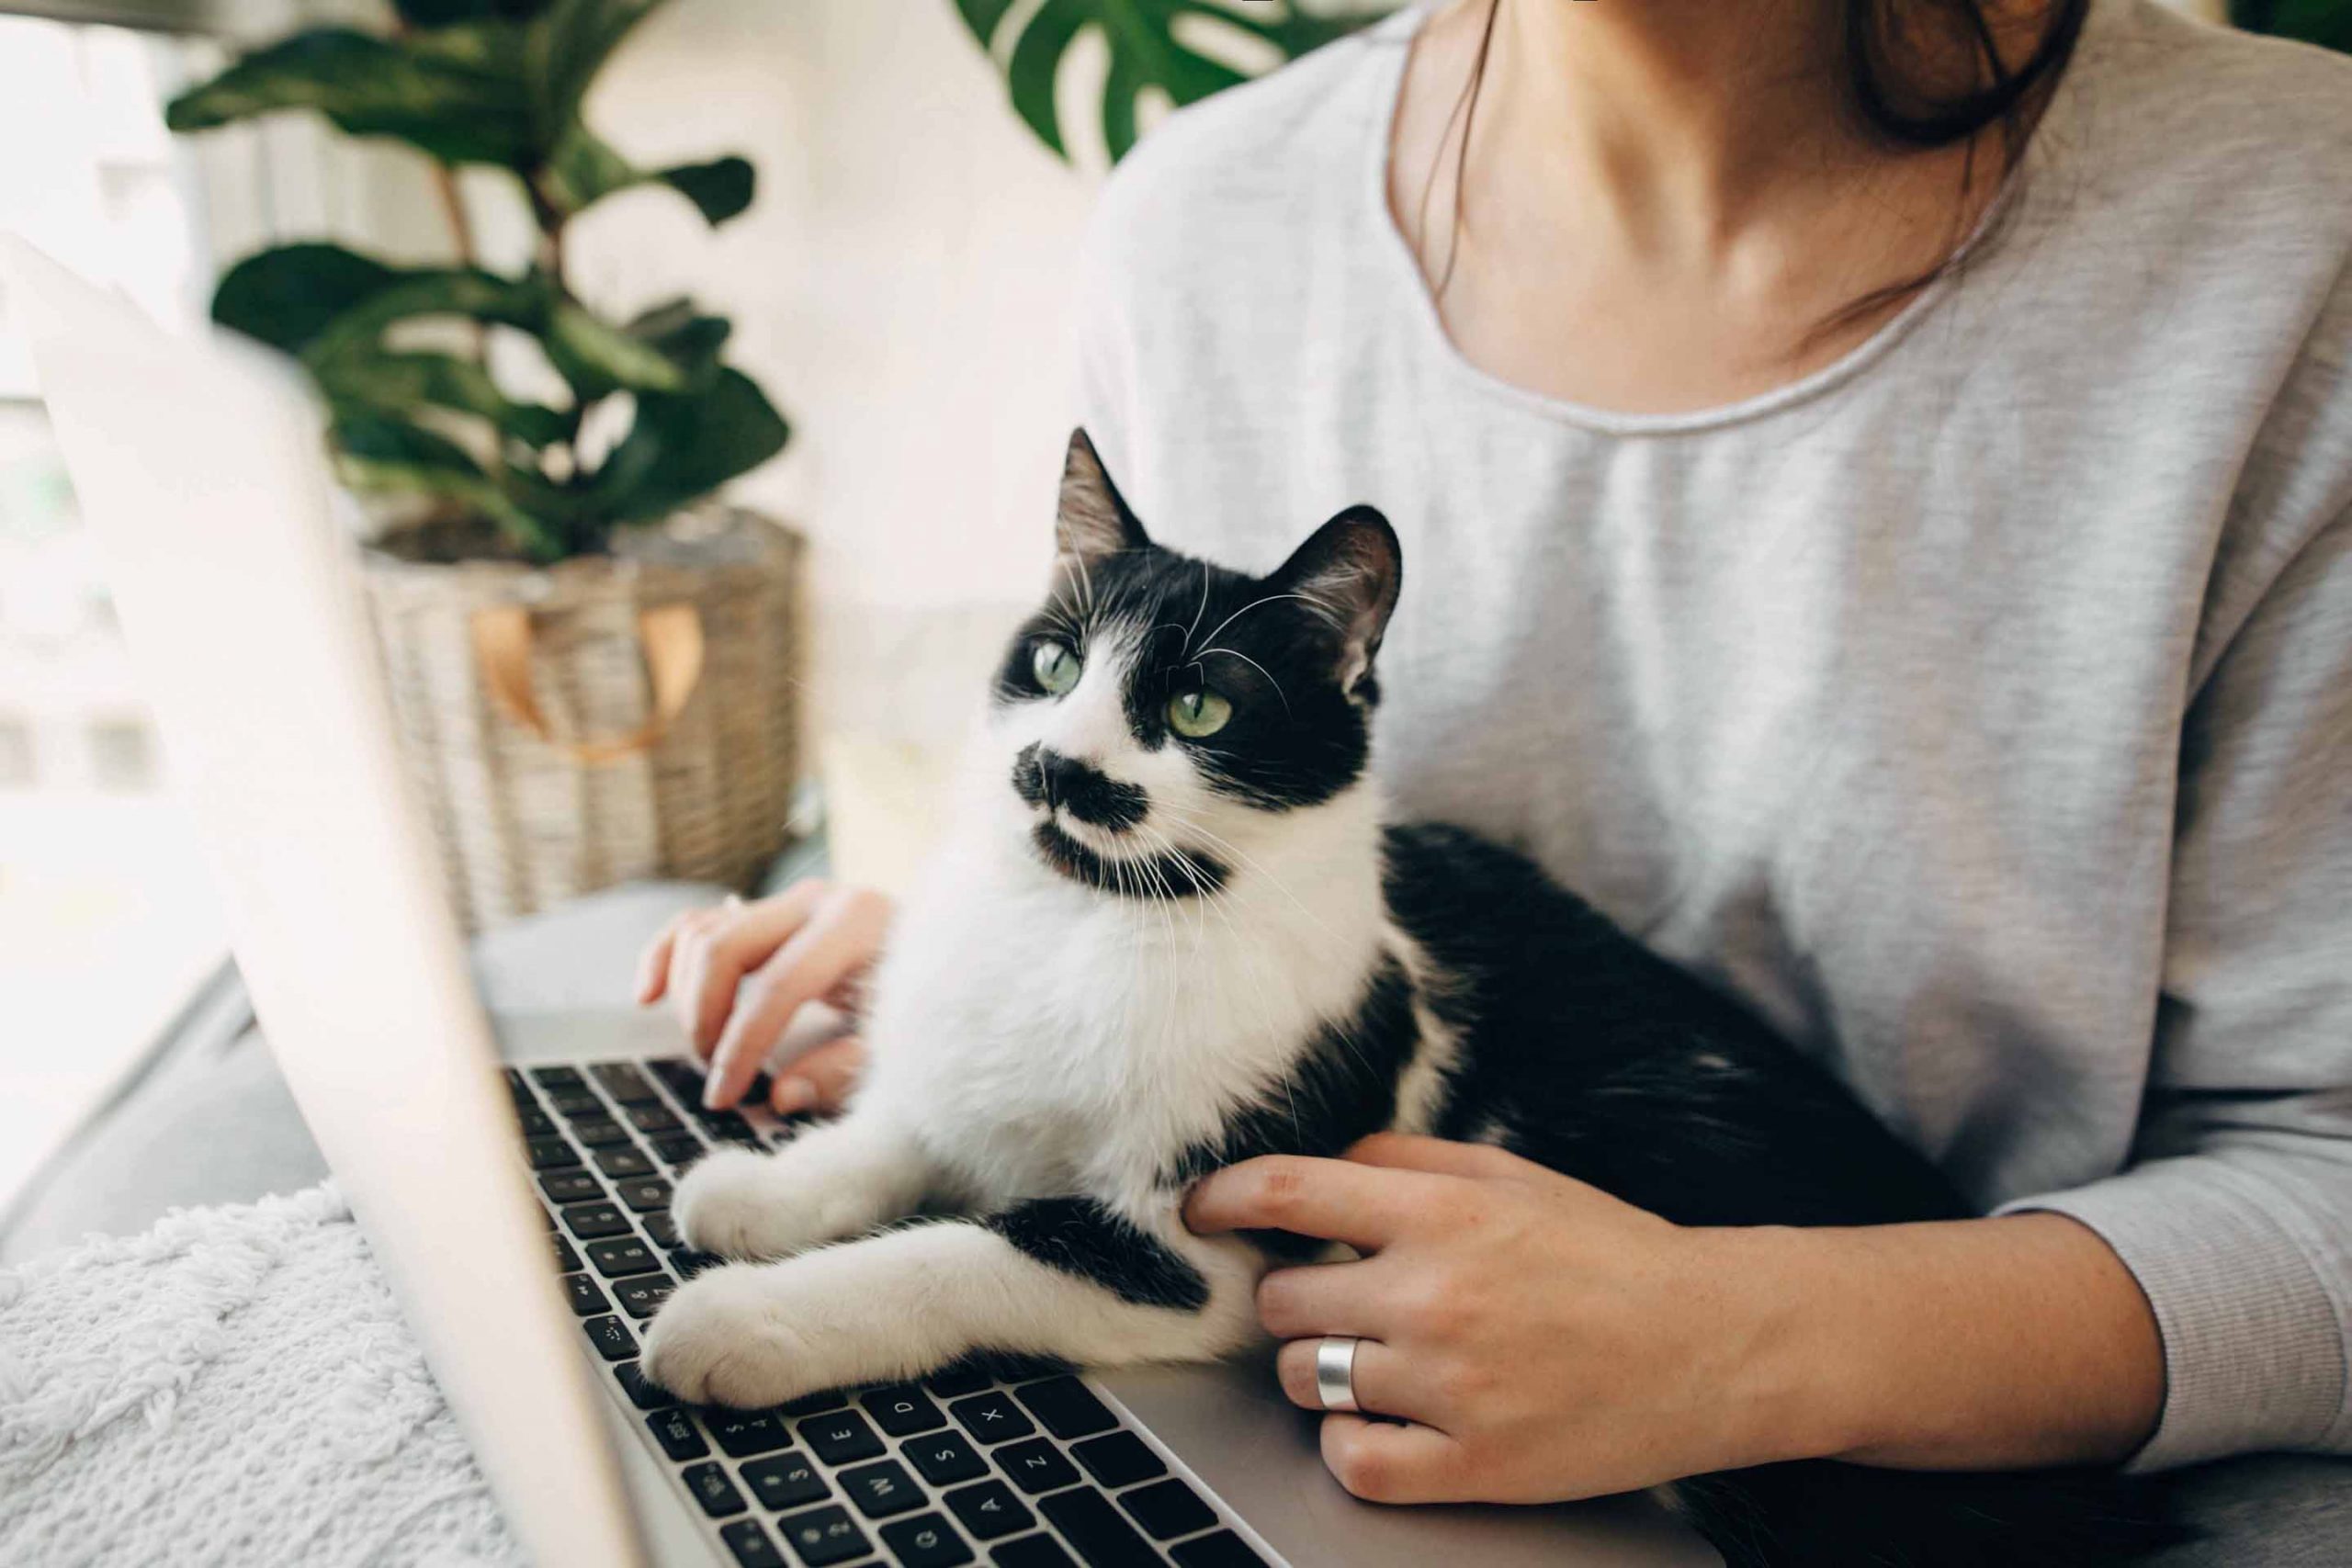 Young woman using laptop and cute cat sitting on keyboard.